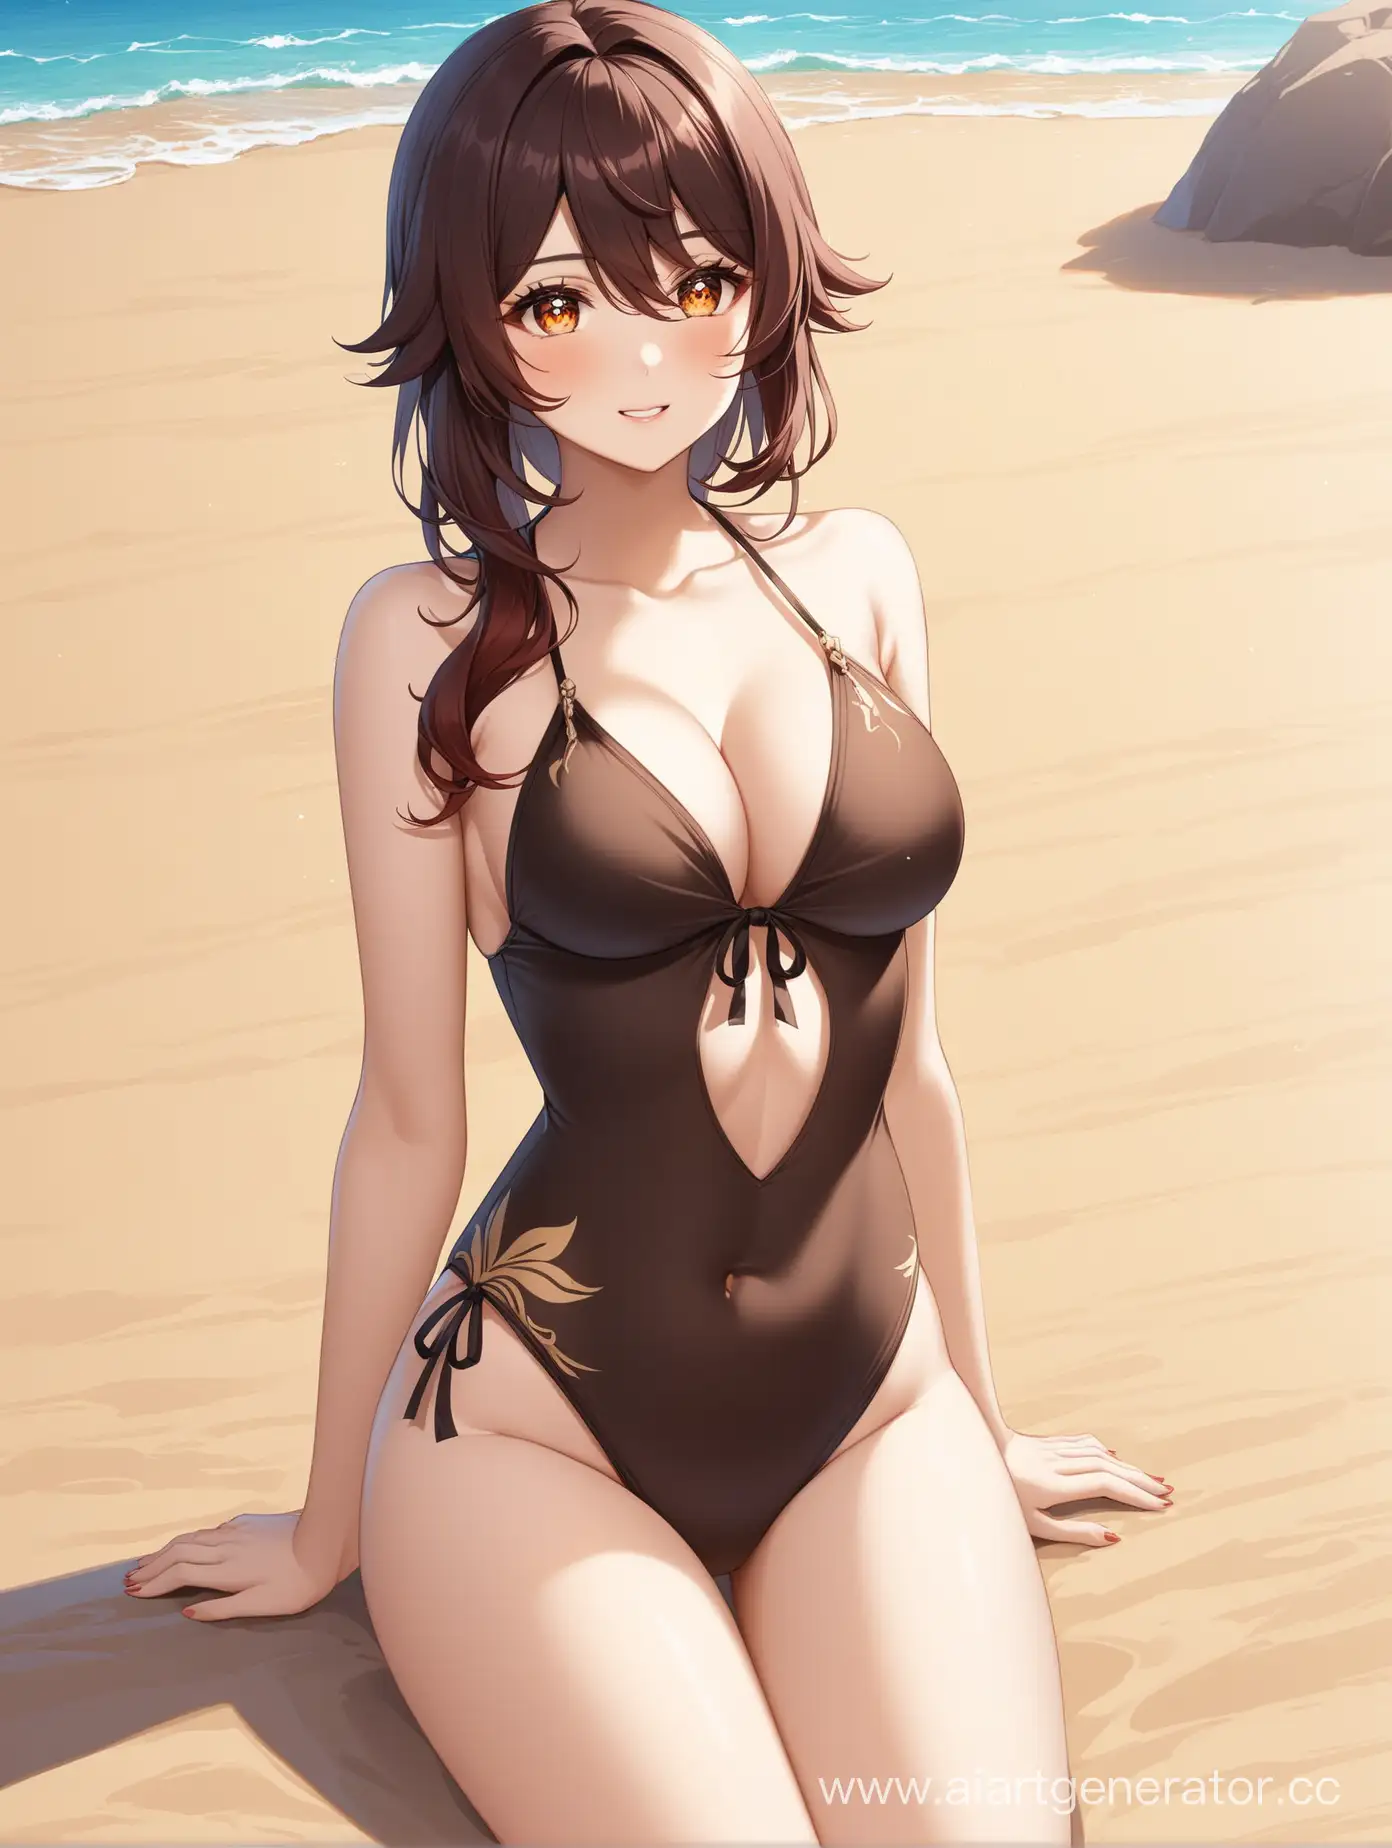 hu_tao_genshin breasts, in a swimsuit on the beach